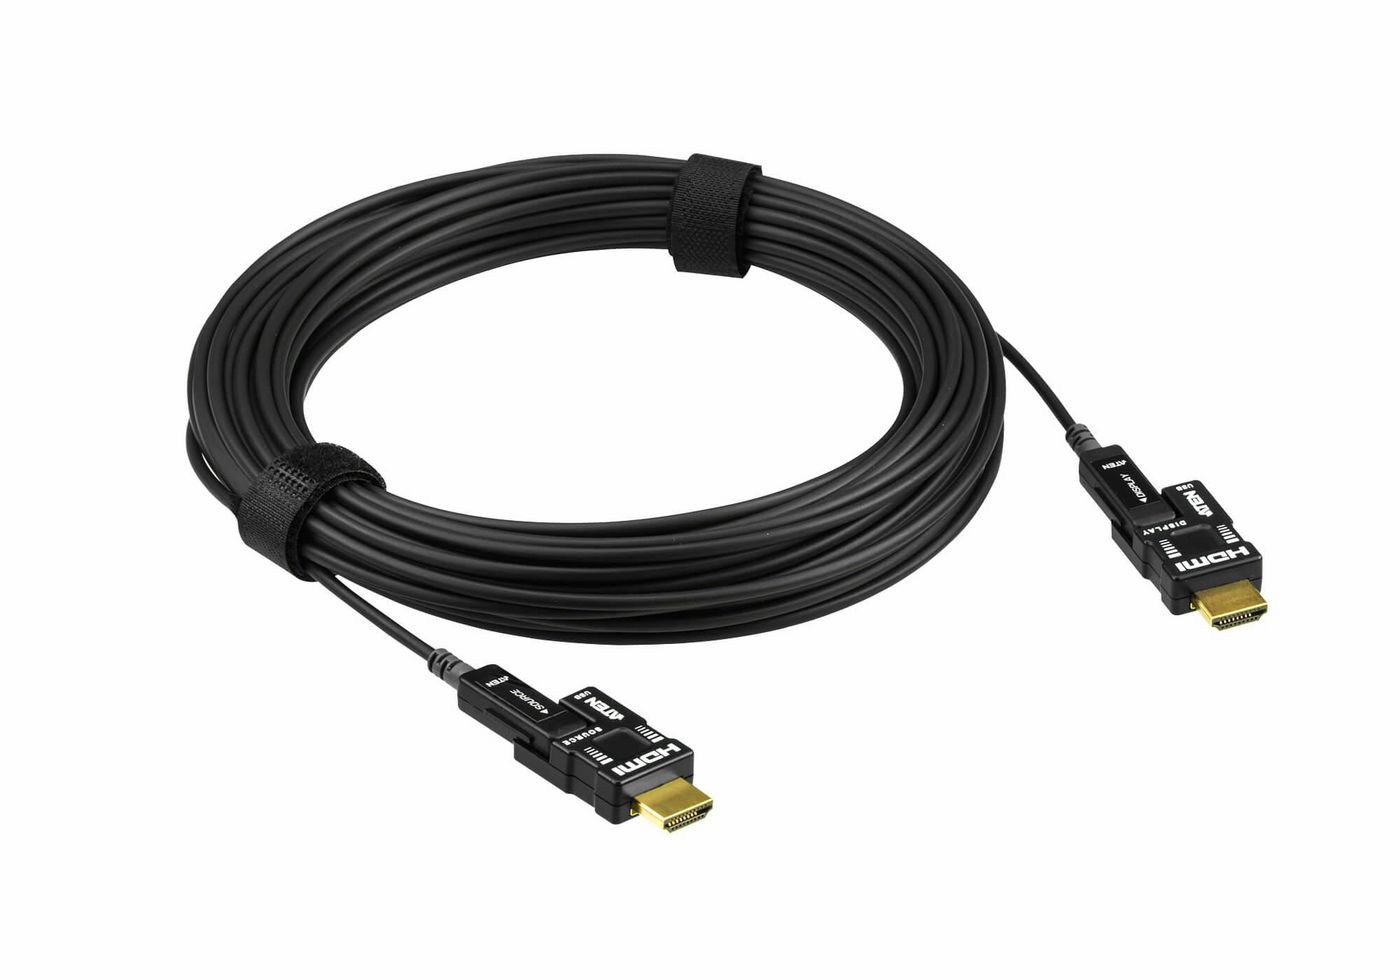 Aten VE7833-AT 30m 4K HDMI Active Opt Cable 